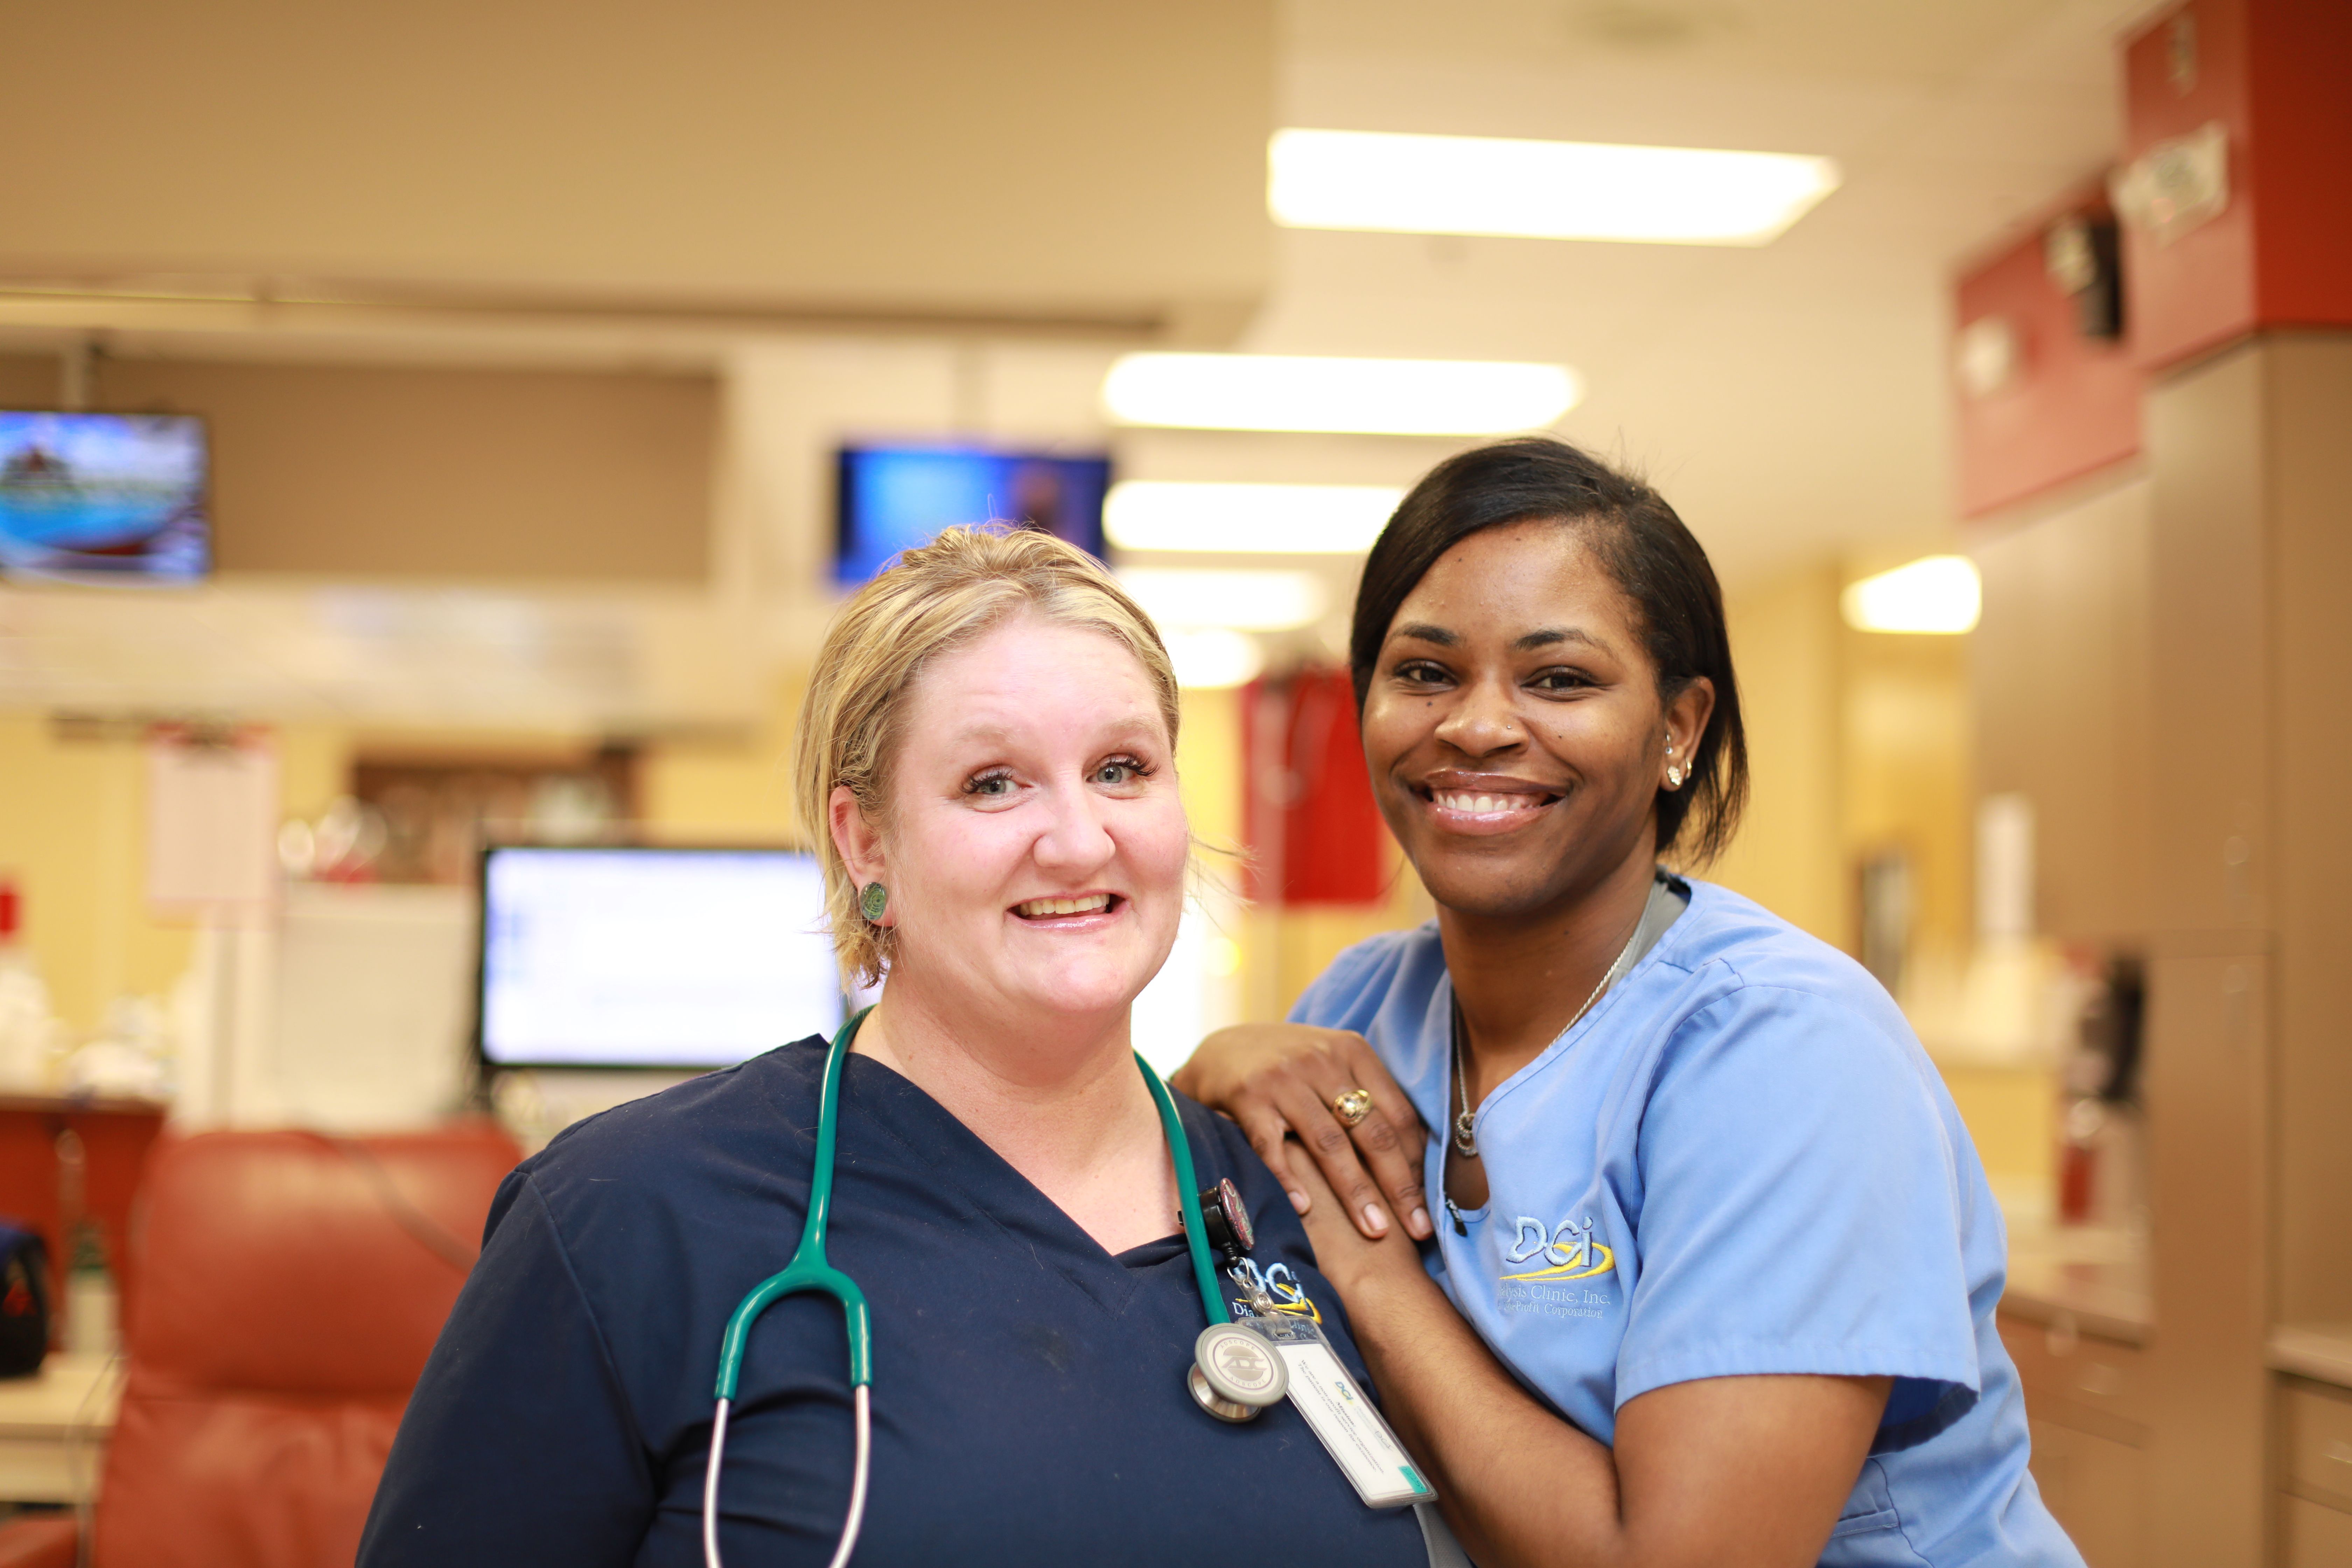 Two female healthcare workers, one white and one black, stand close together smiling.